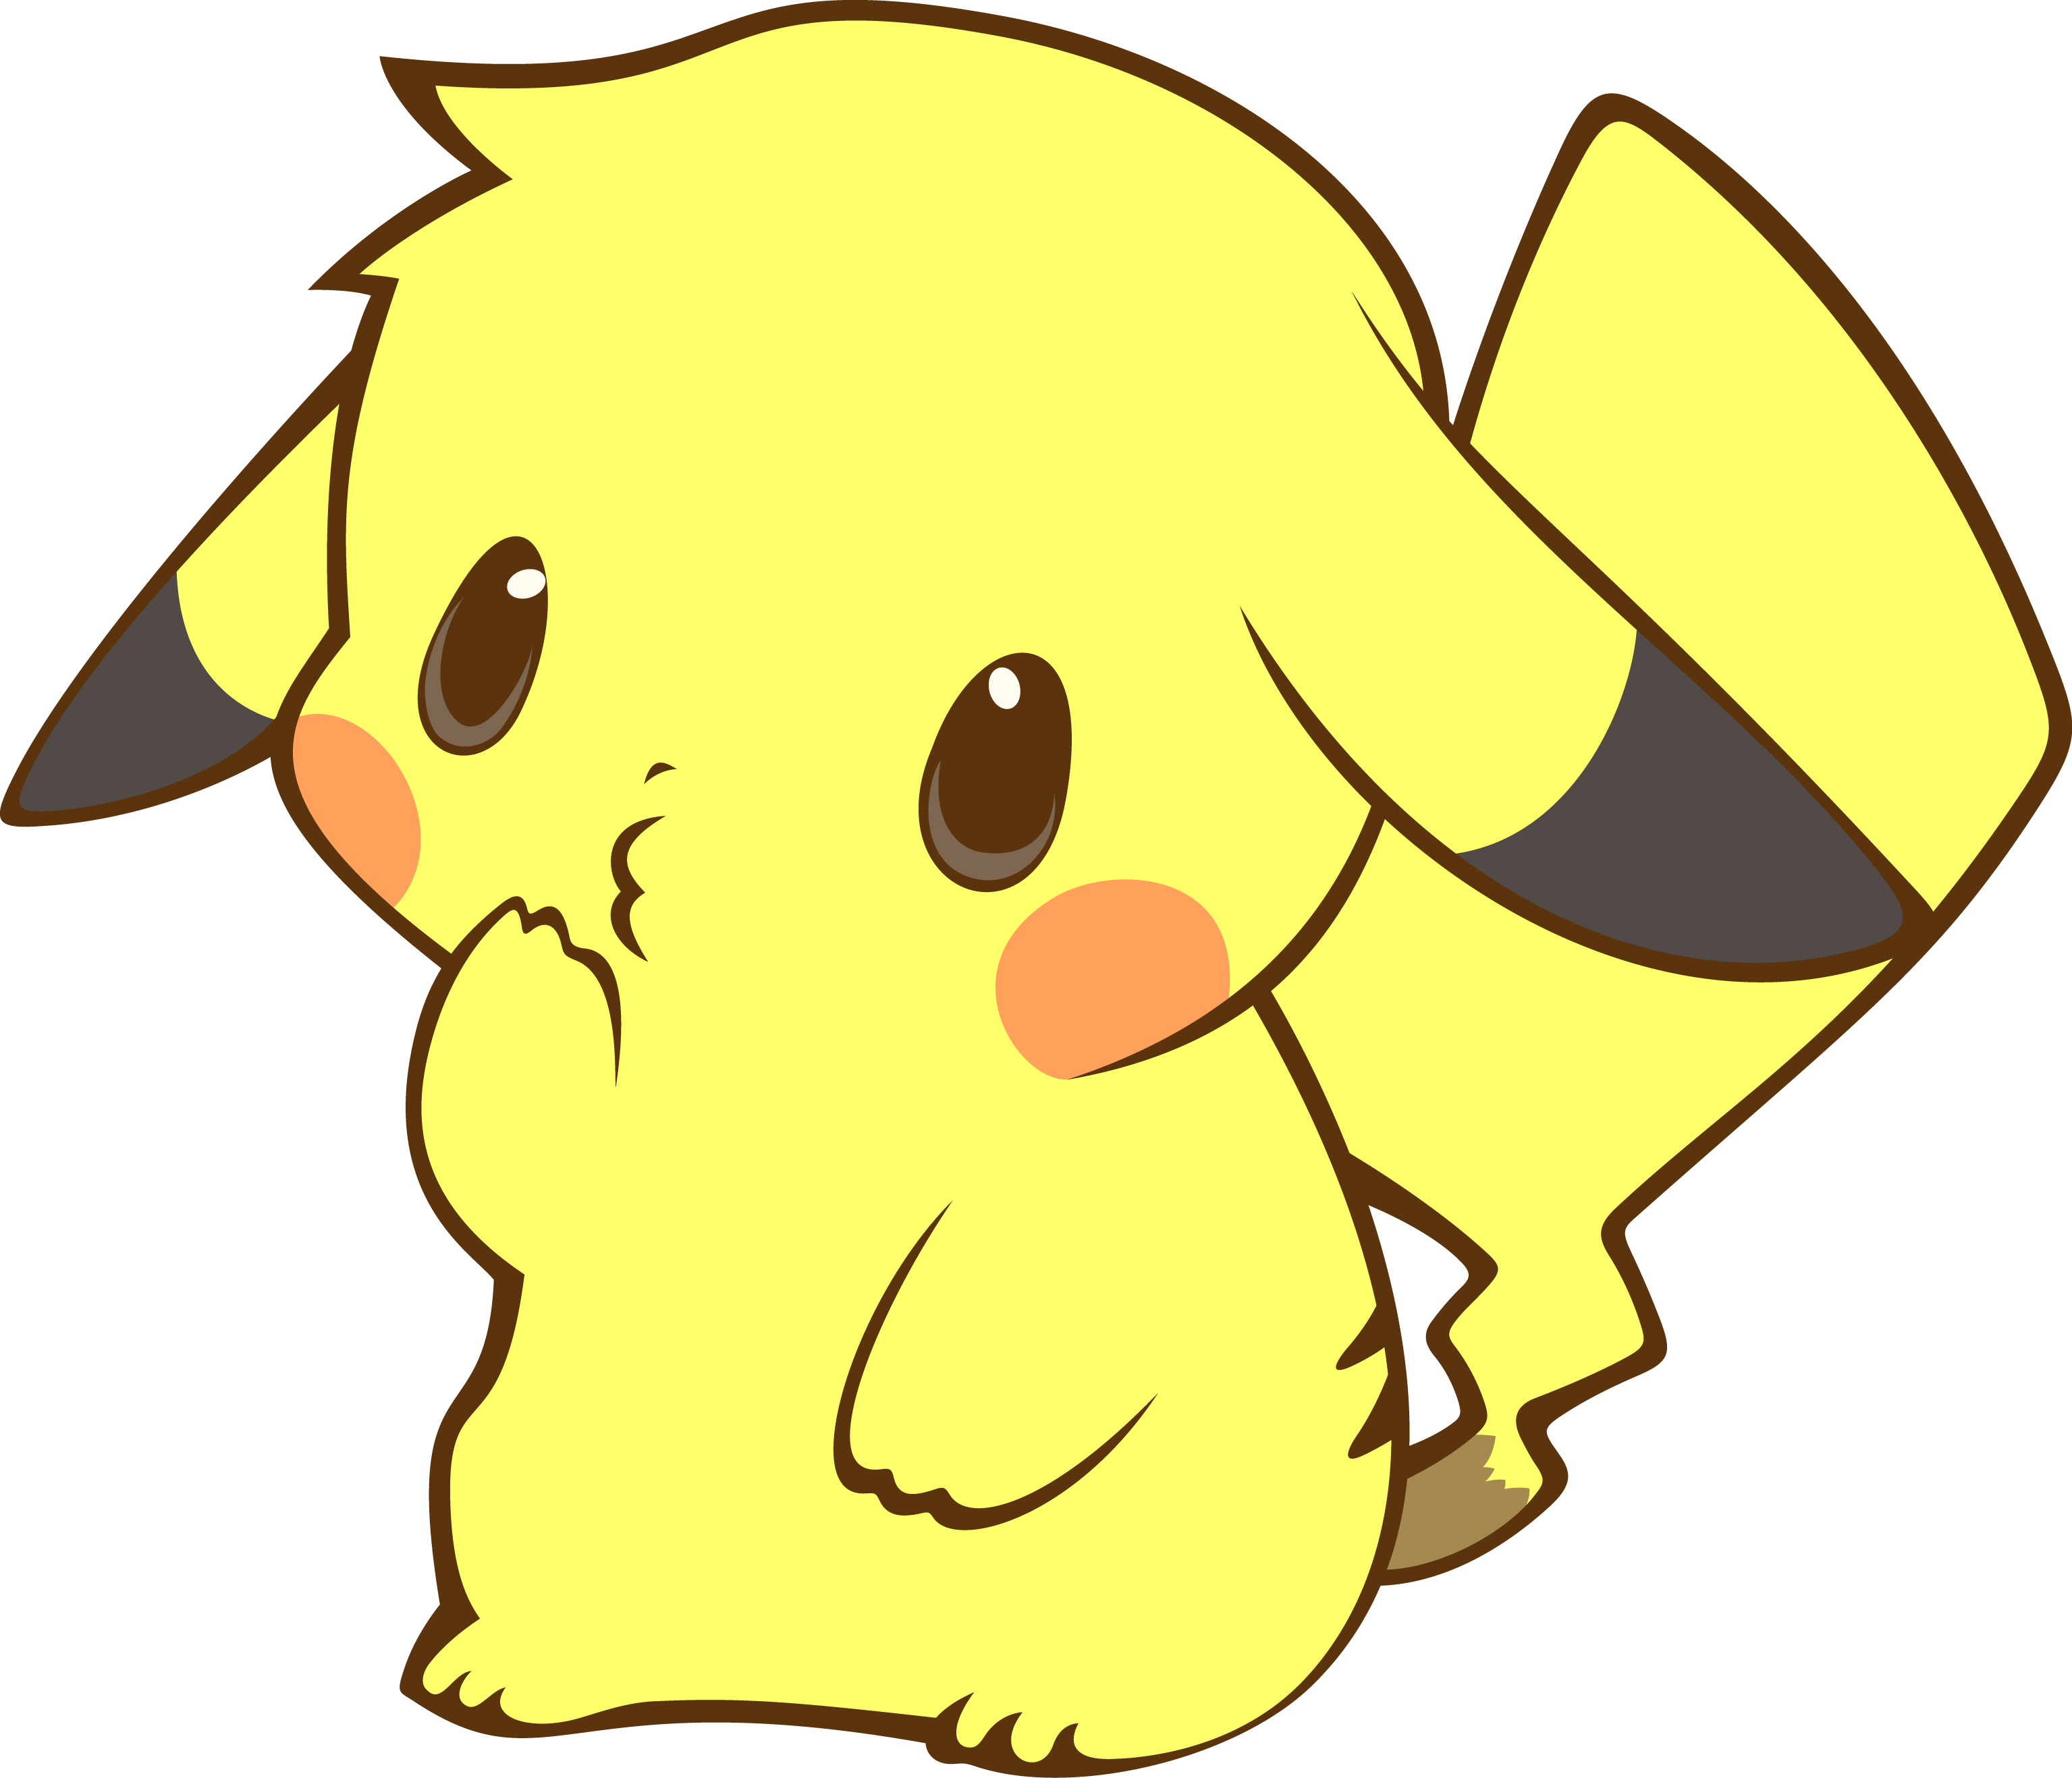 Free Cute Pikachu Wallpapers For Iphone at Movies " Monodomo.